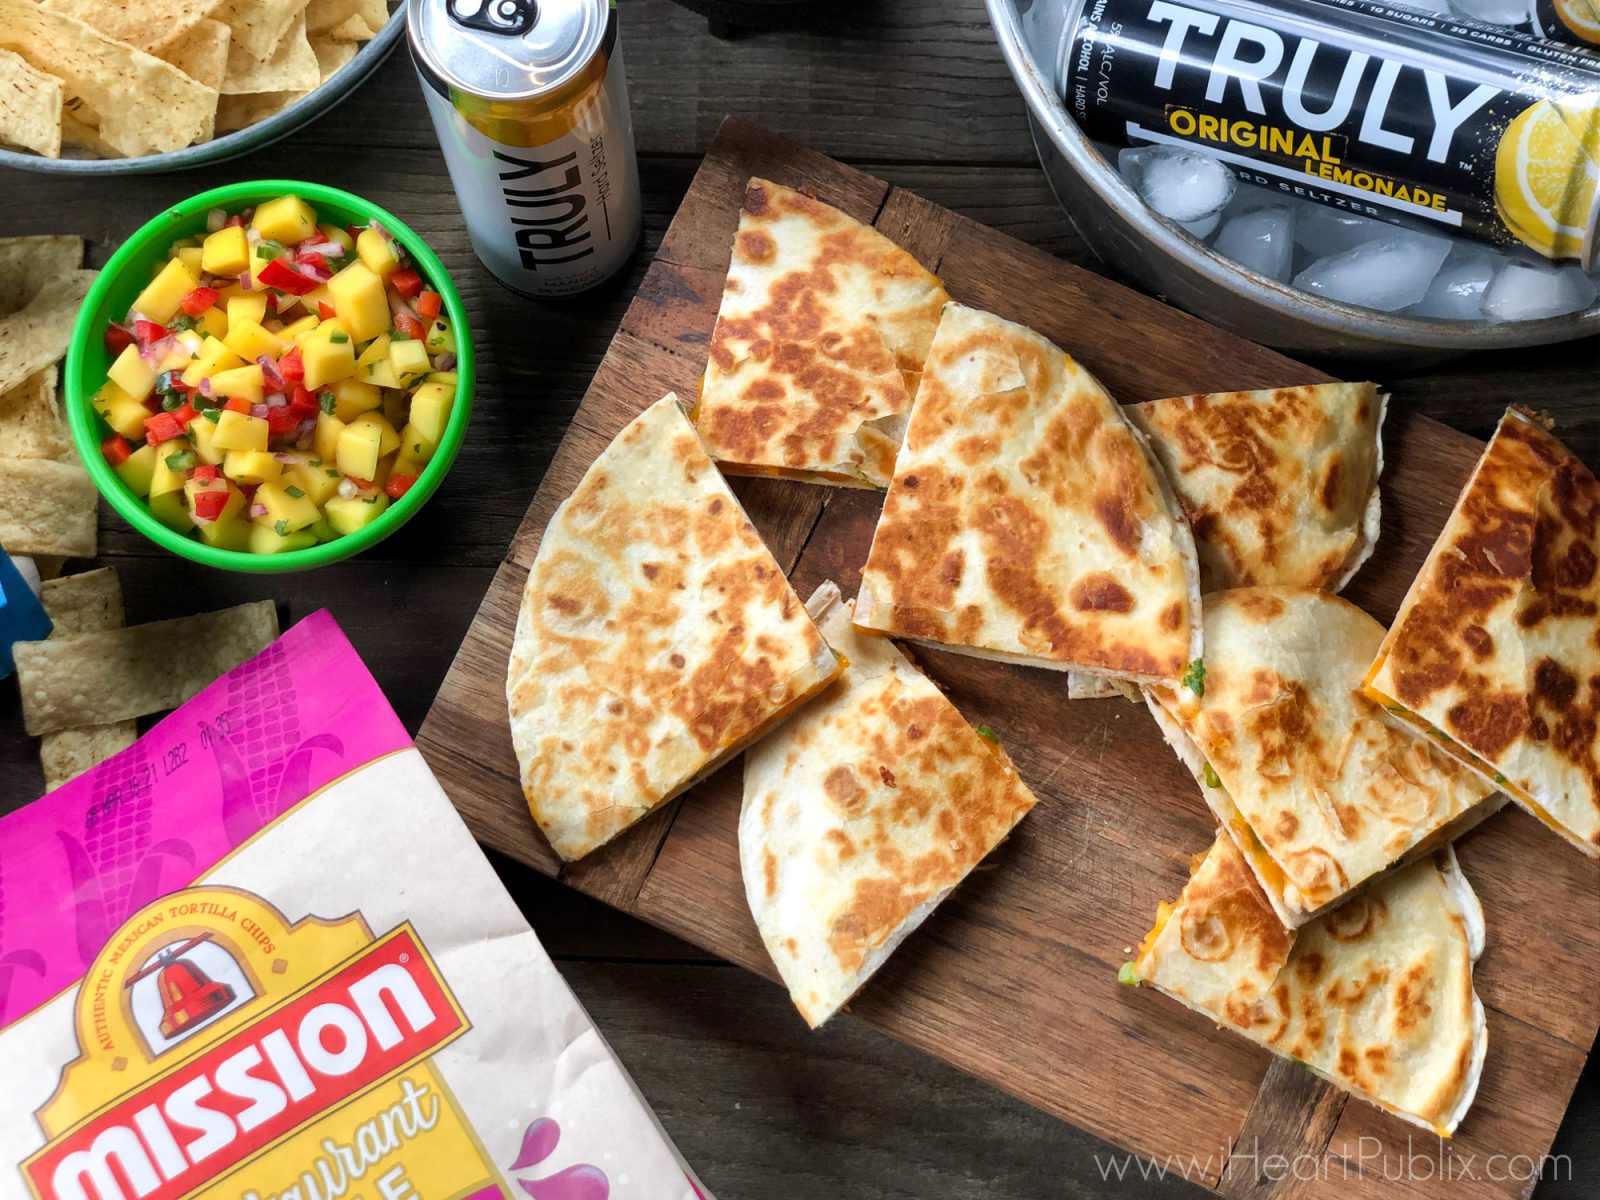 Bring Home Truly® Hard Seltzer & Mission® Products For Game Day And Earn Cash Back – Flavor Always Wins!